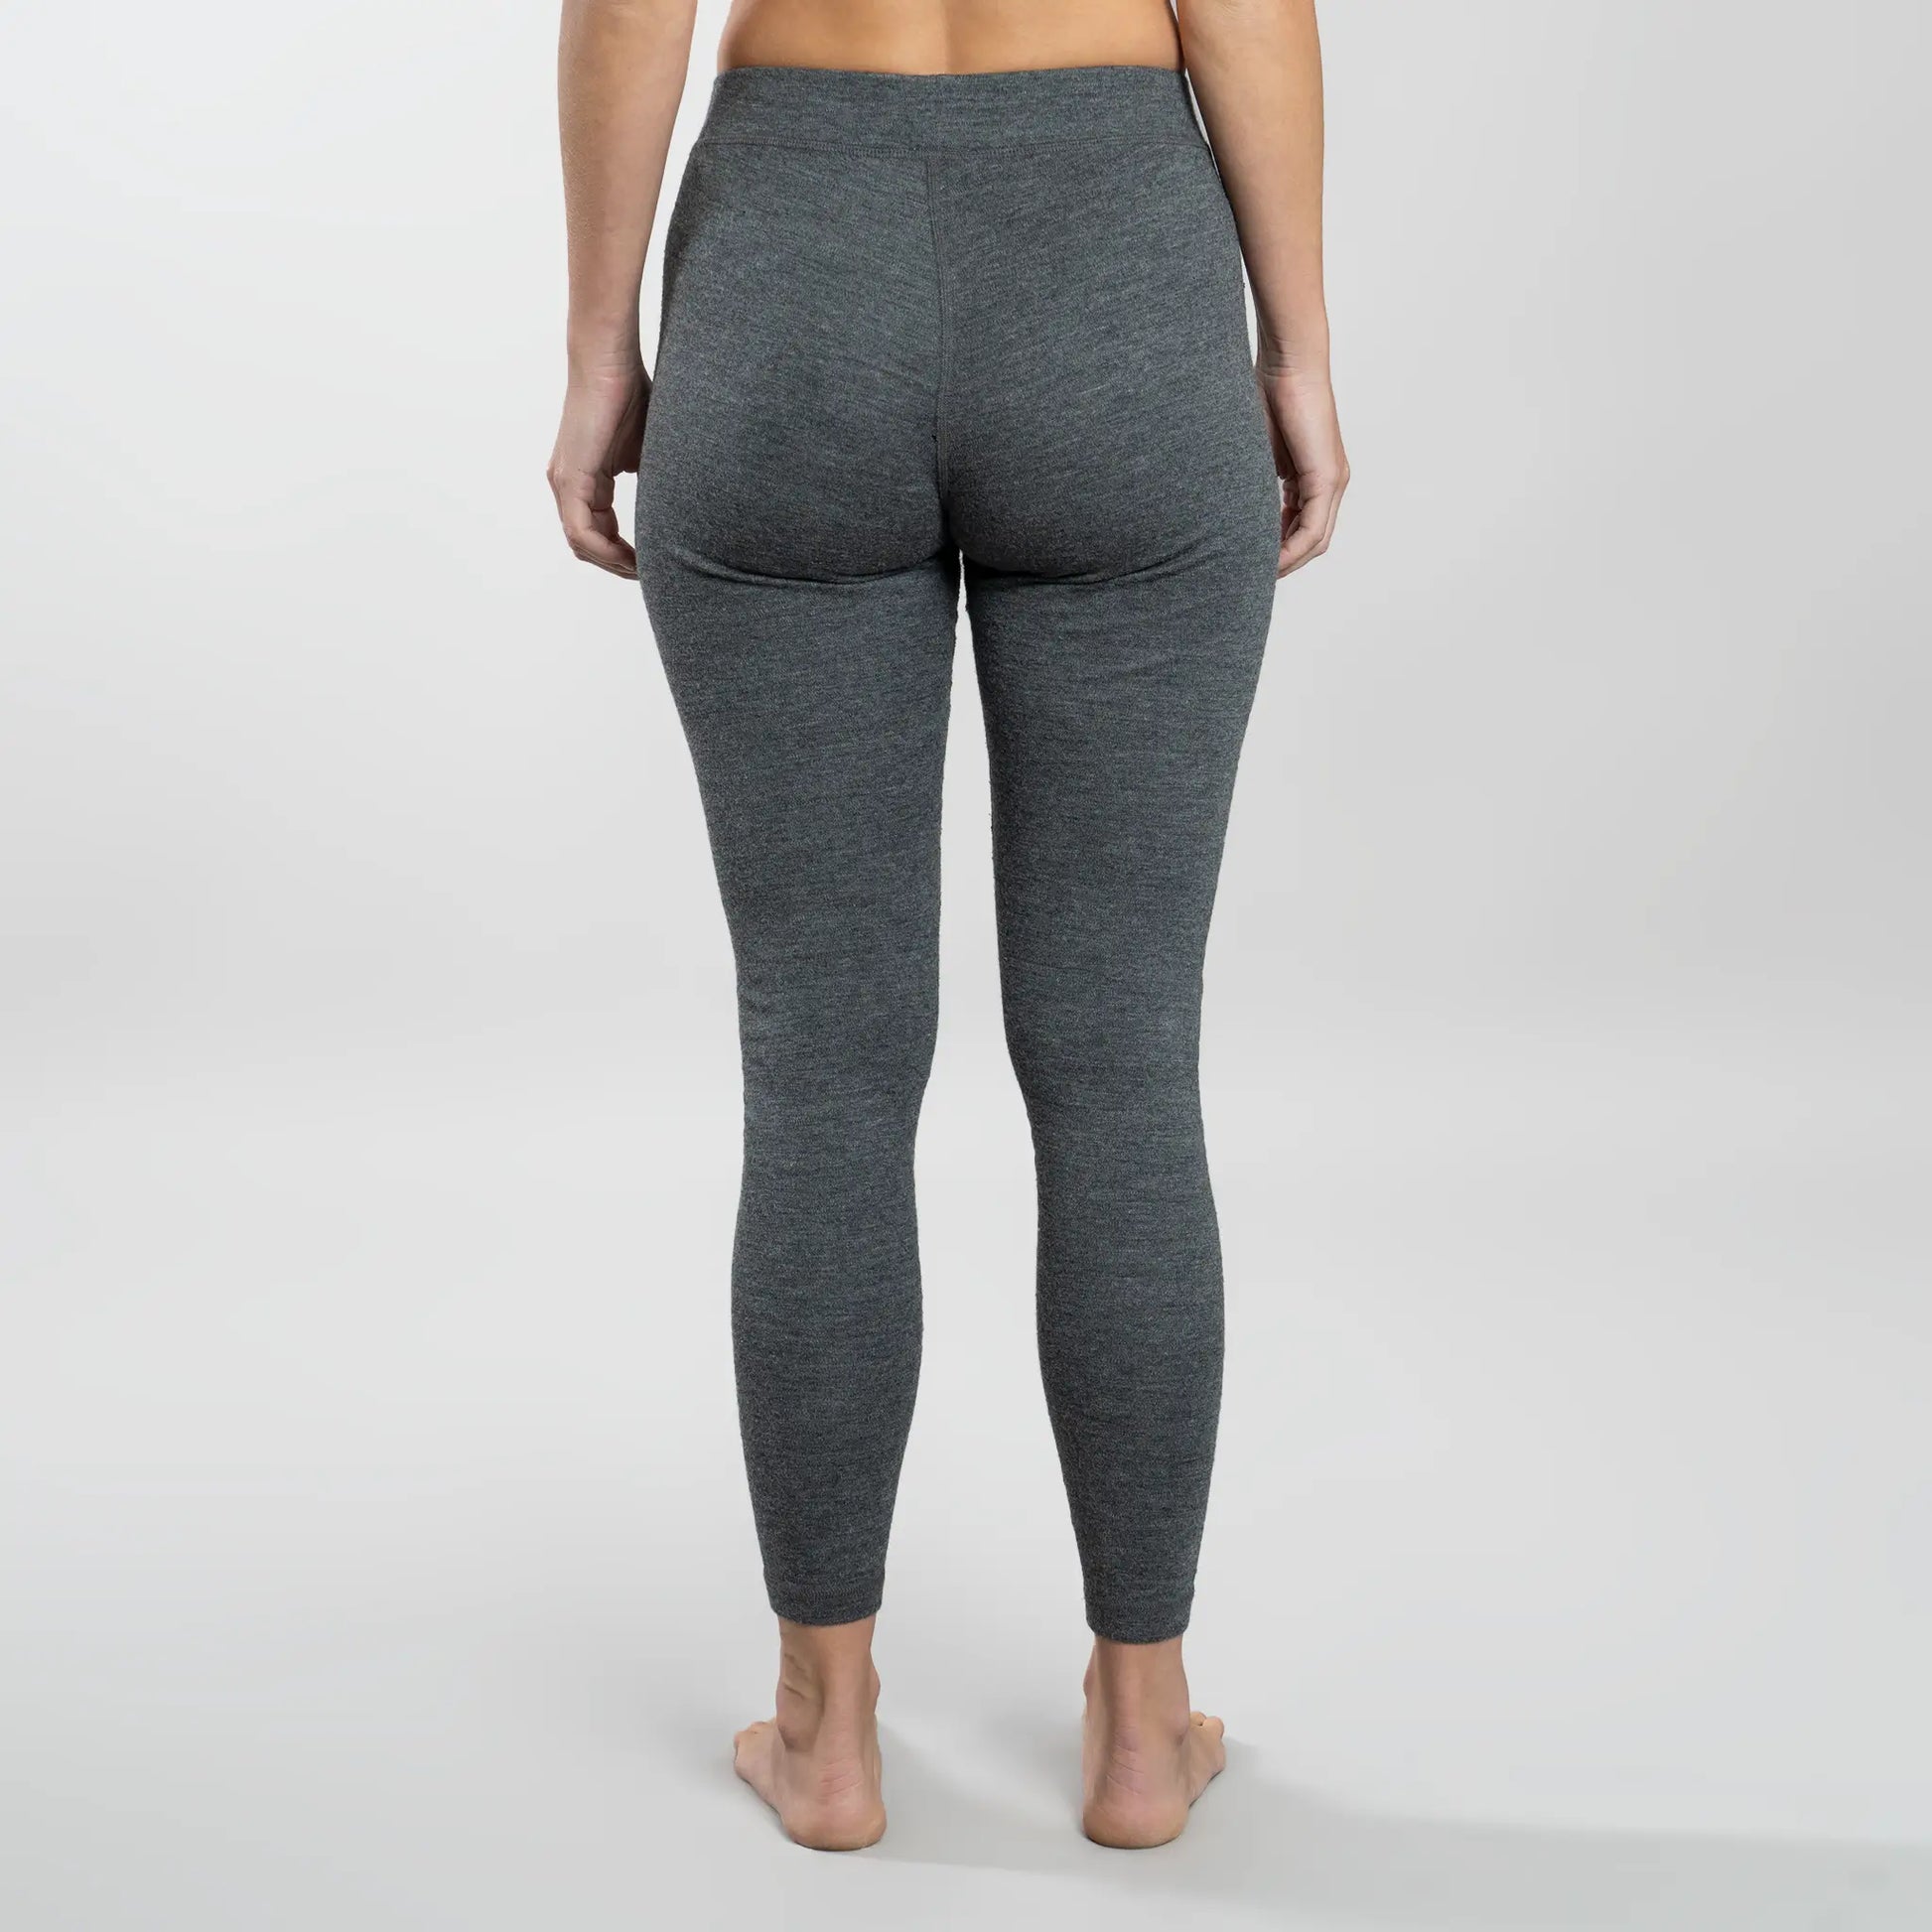 Womens Wool Leggings From 100% Natural Undyed Wool, Long